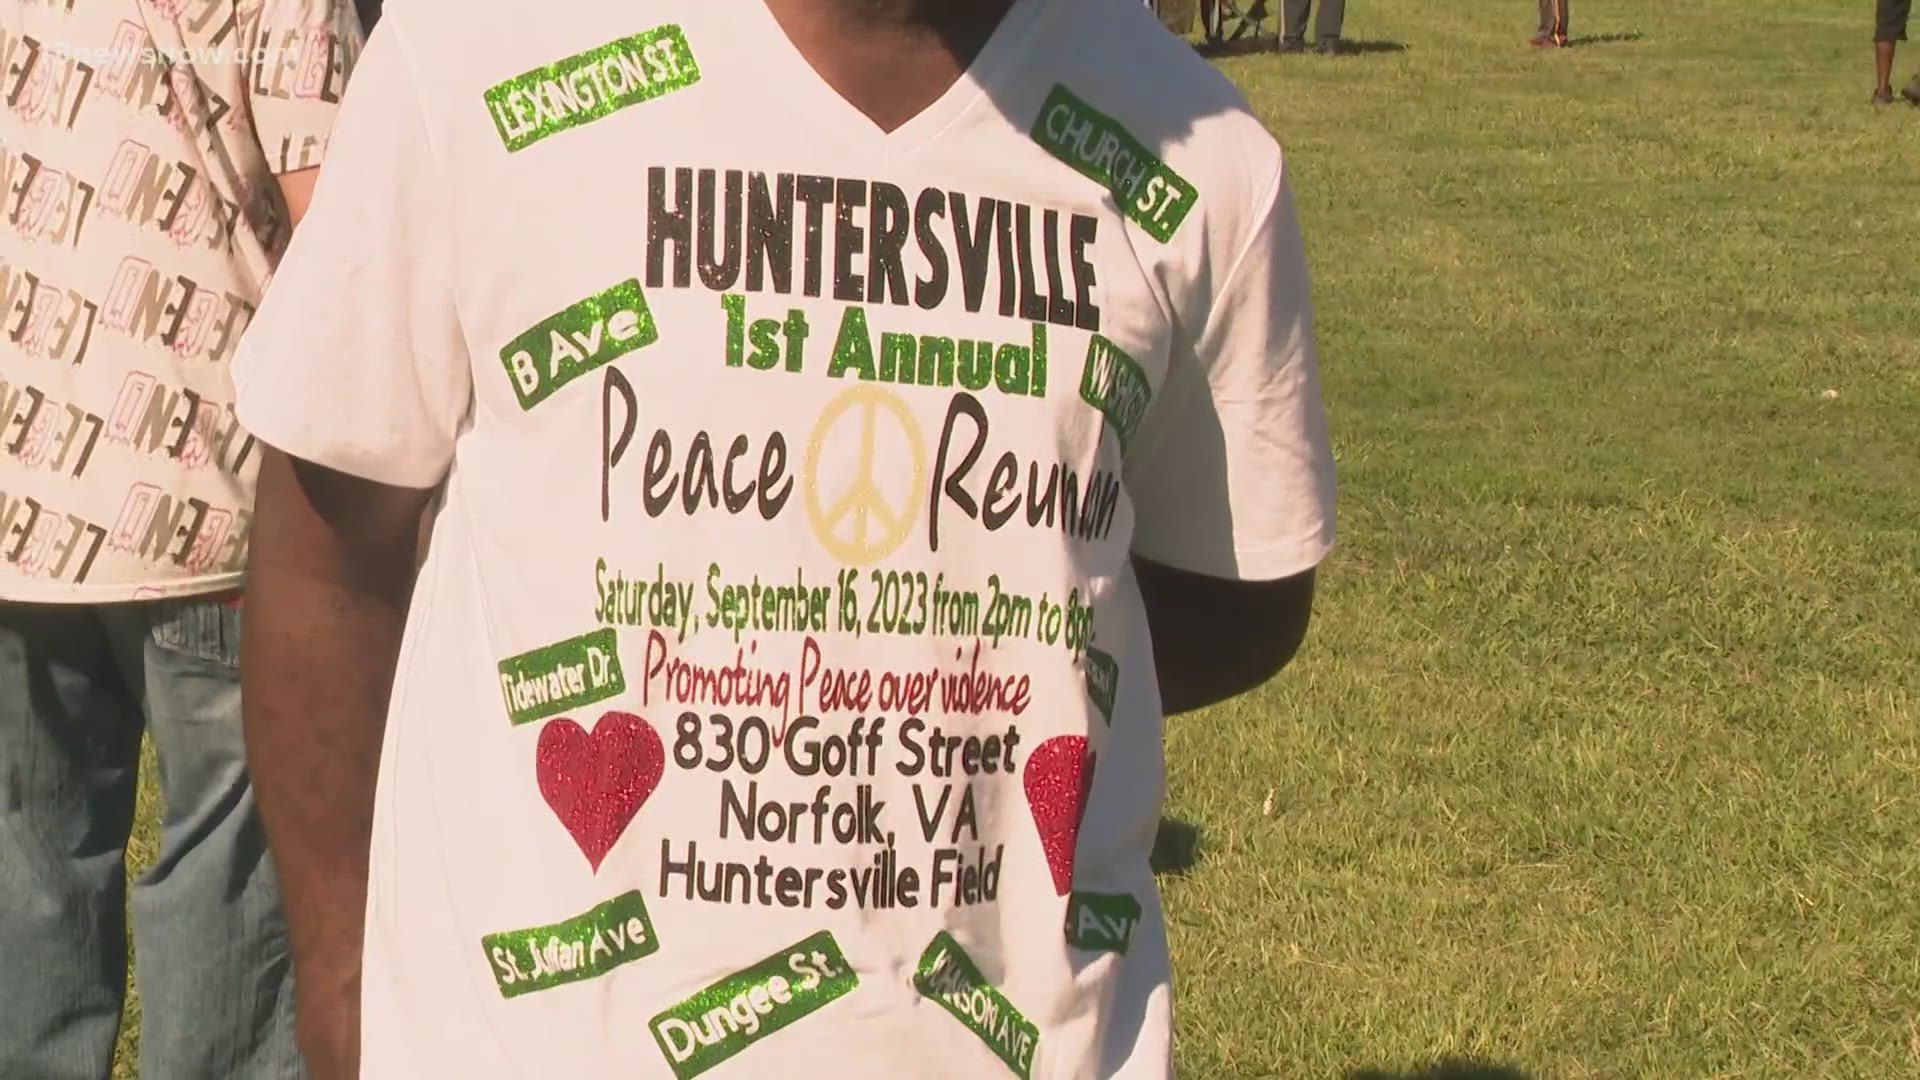 Activists held the inaugural Huntersville Peace Reunion to promote peace over violence in the Huntersville neighborhood.